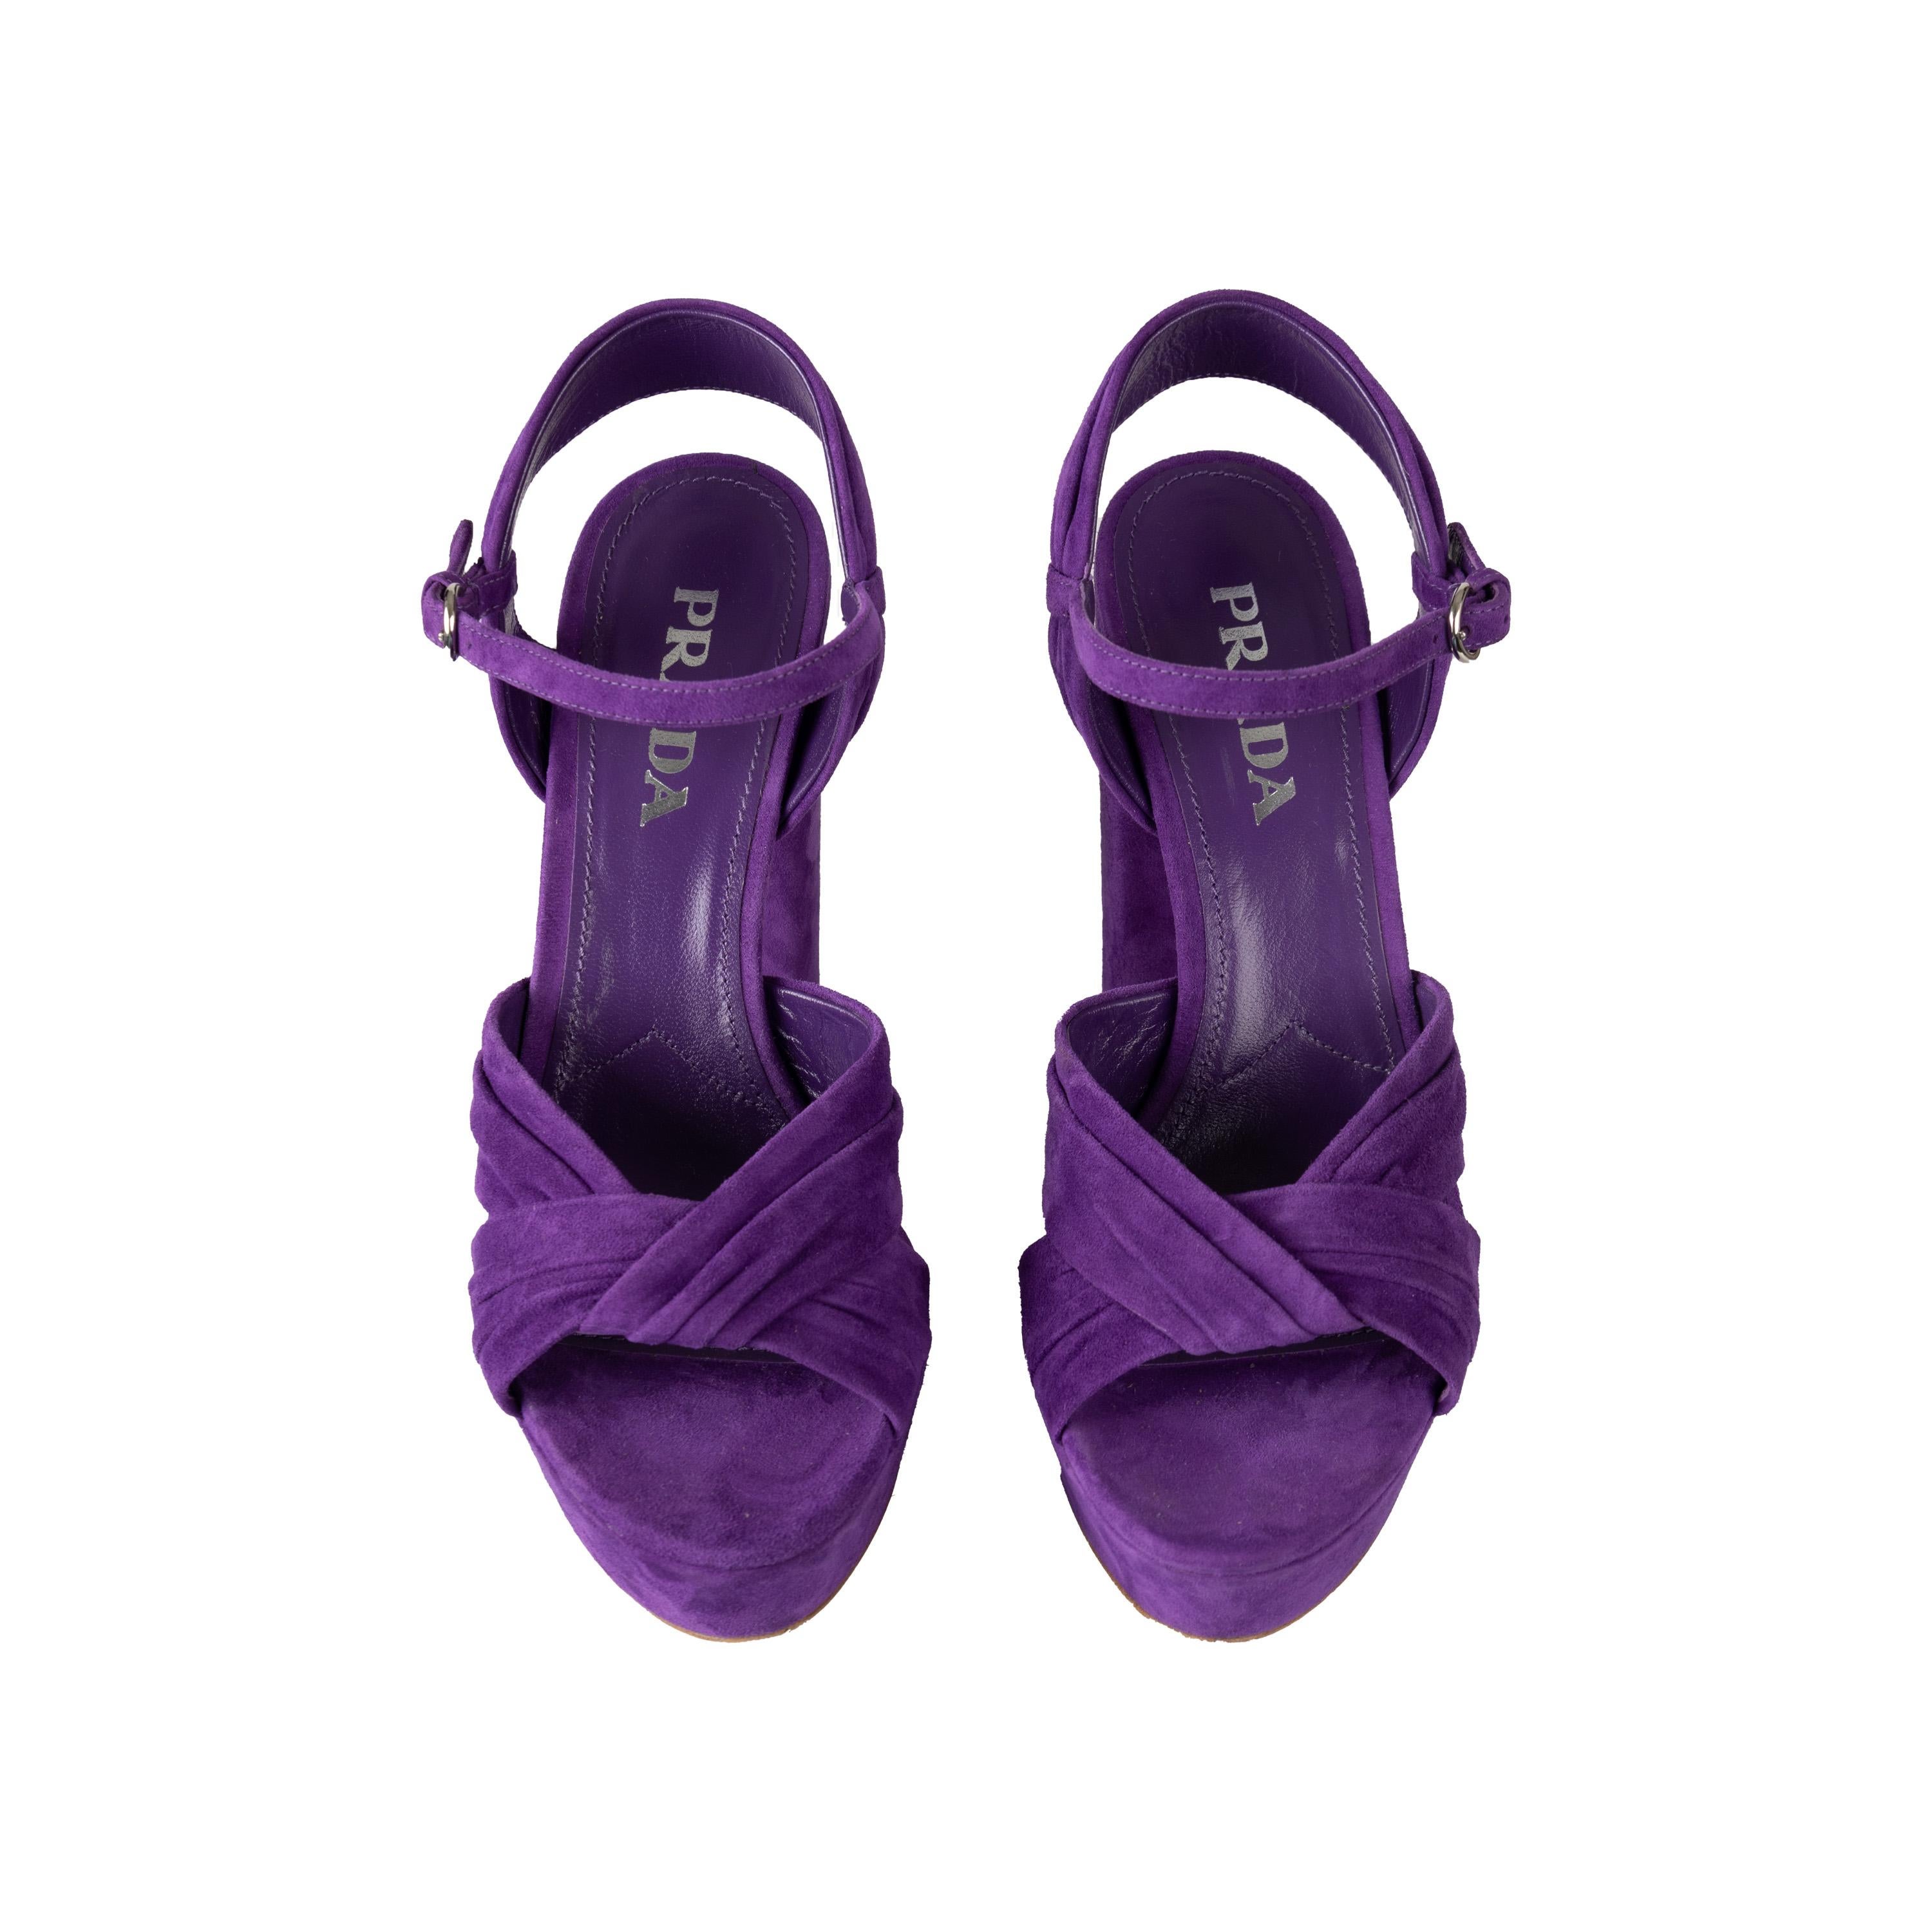 These Prada Suede Platform Heels offer a luxurious look with its peep toe high heels and platform style. Crafted from soft suede in a beautiful purple color, they feature a twisted cross over the vamp and an ankle strap with a buckle closure. A